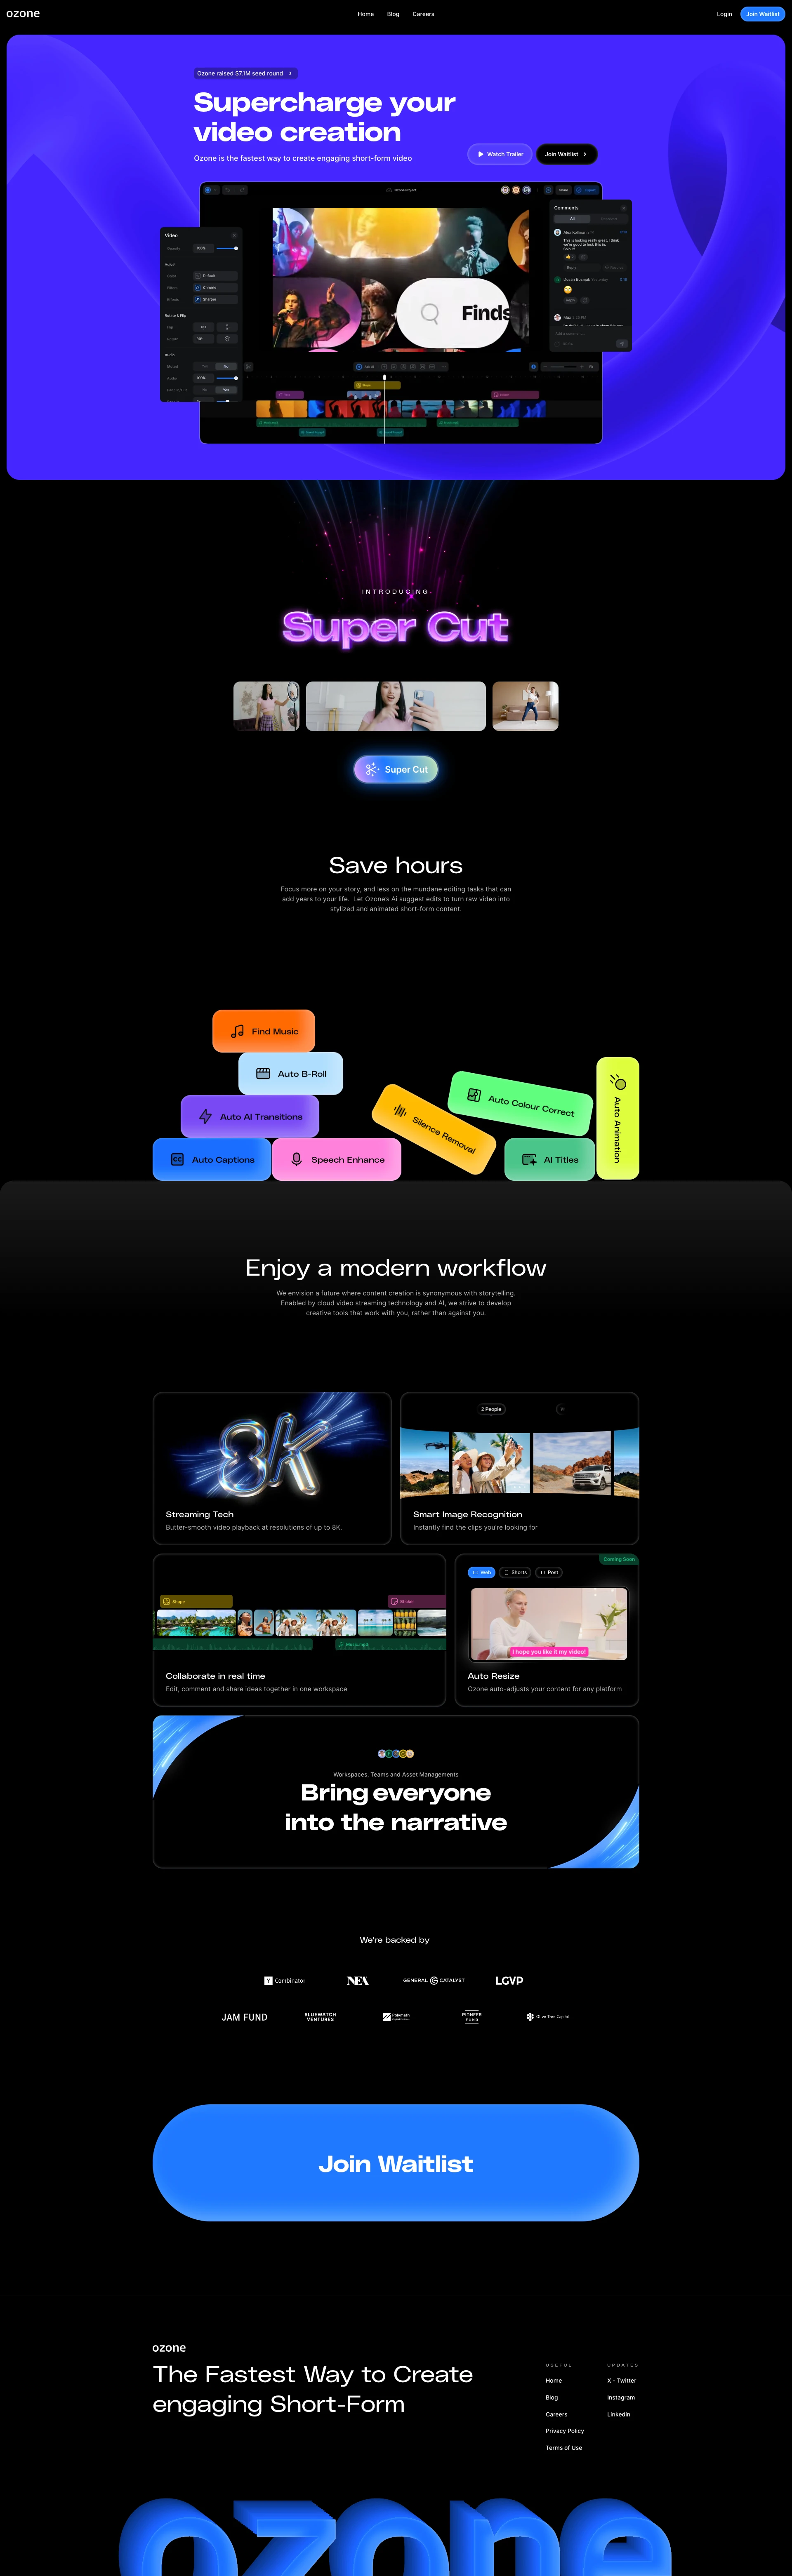 Ozone Landing Page Example: Supercharge your video creation. Ozone is the fastest way to create engaging short-form video.